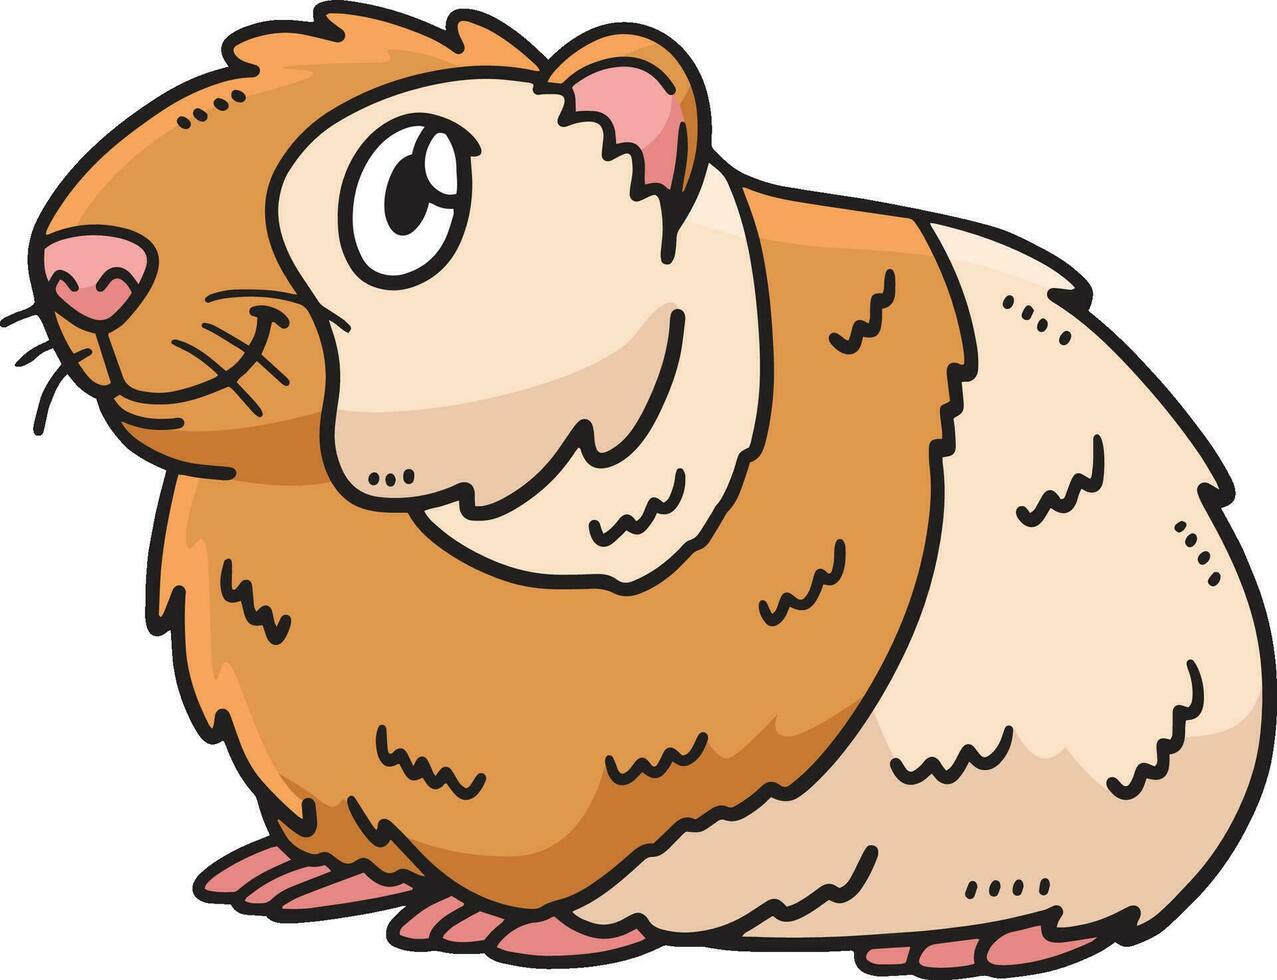 Baby Guinea Pig Cartoon Colored Clipart vector